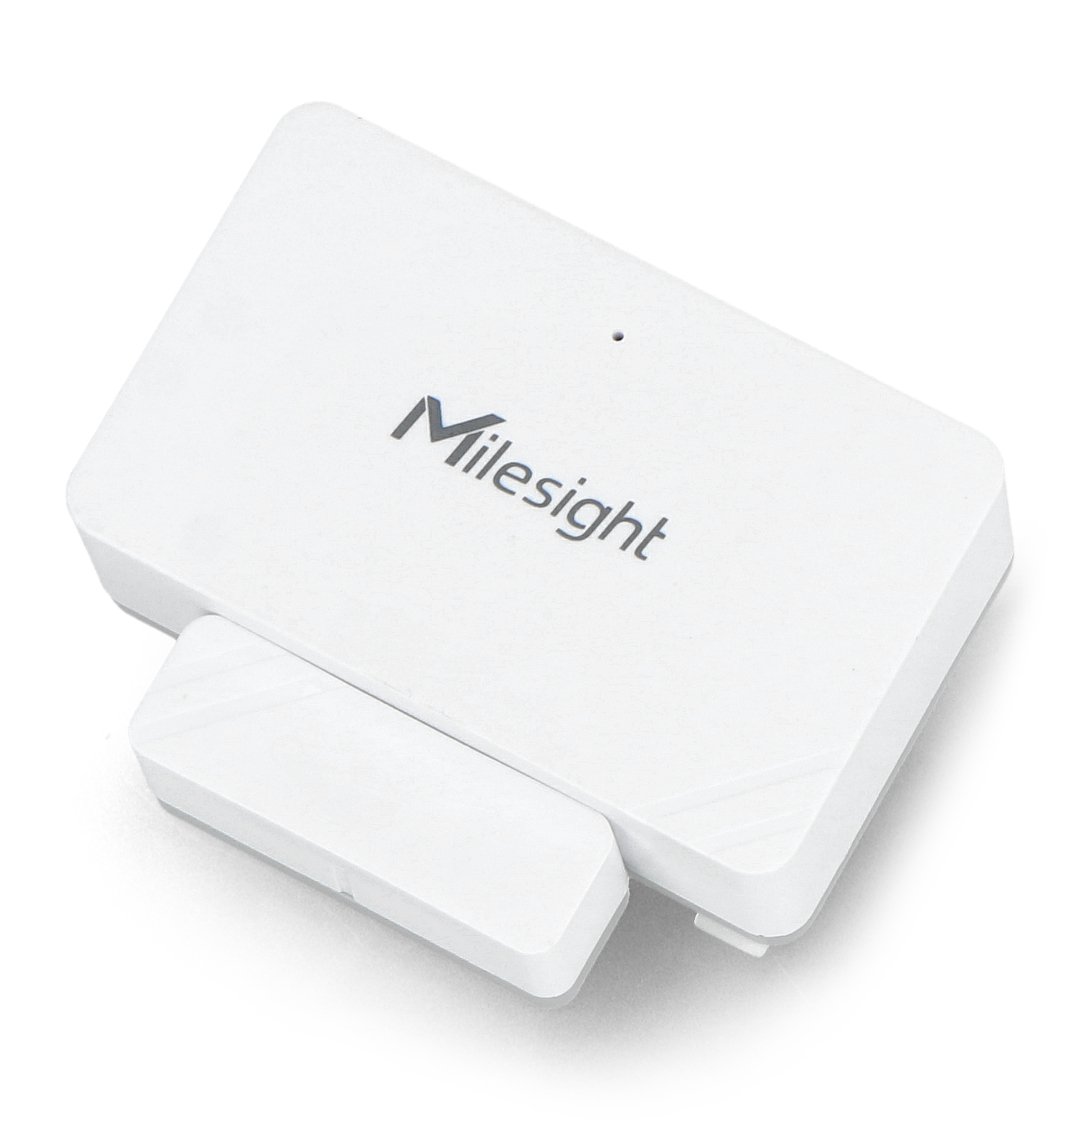 The Milesight door and window sensor lies on a white background.